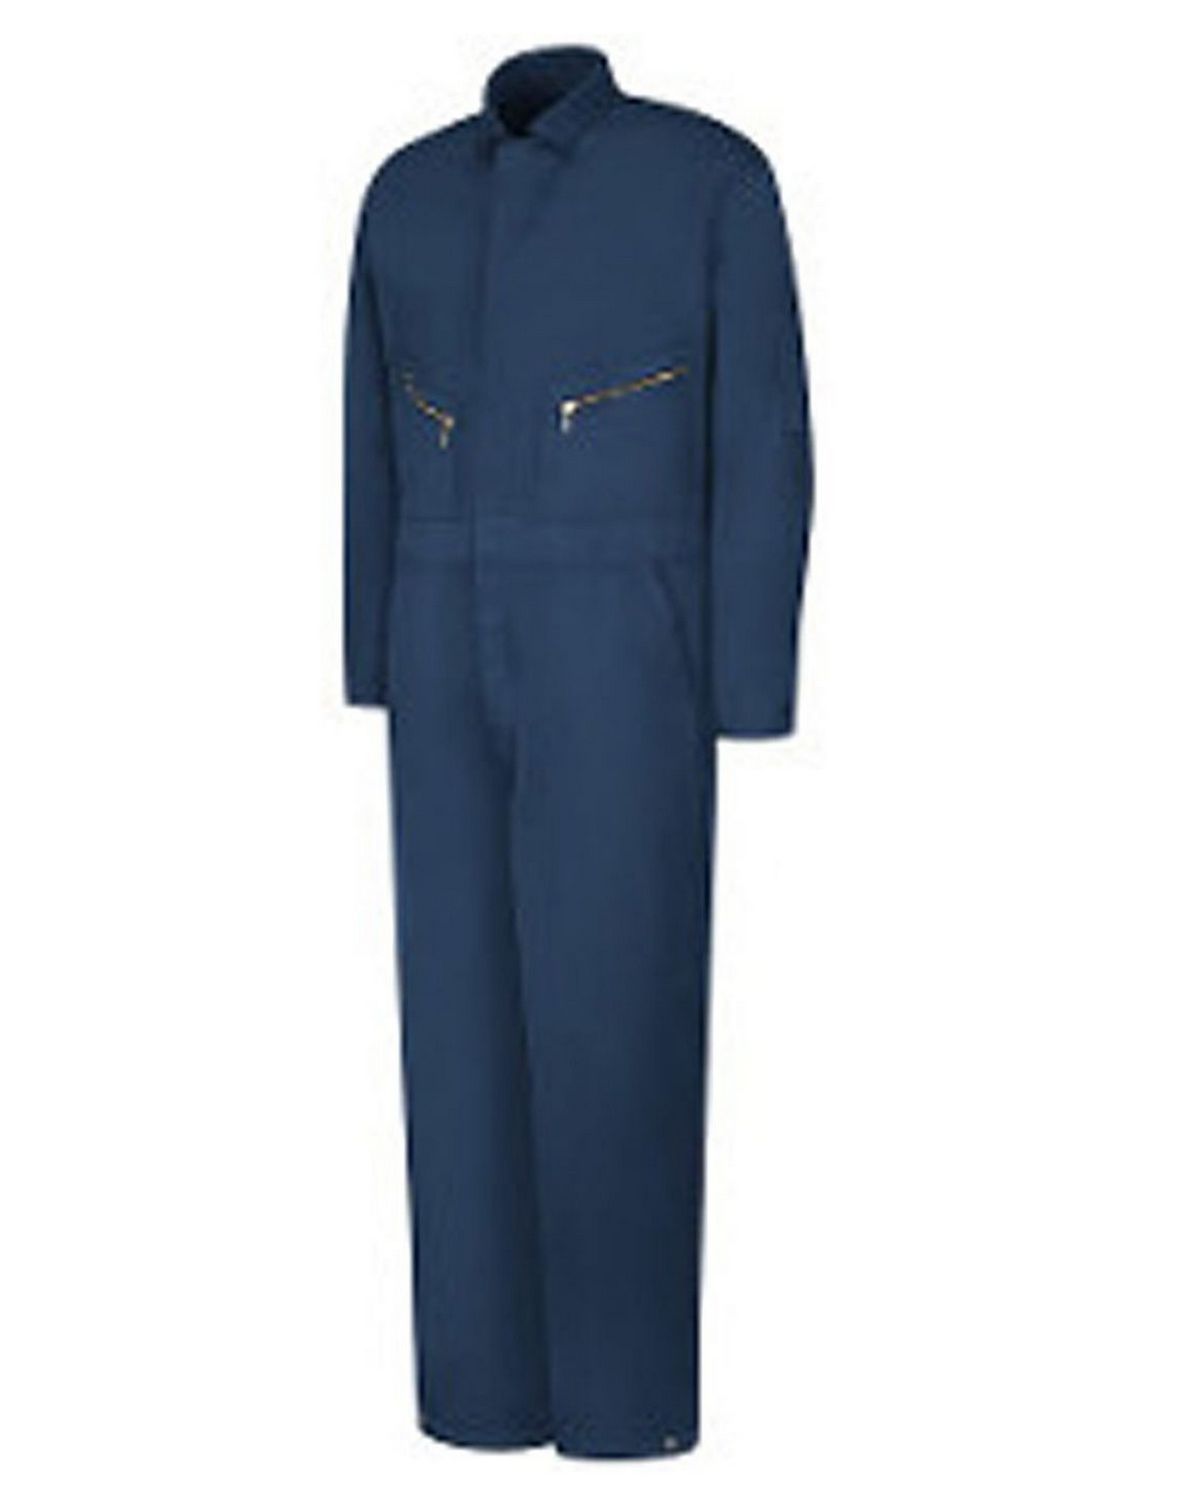 red kap coveralls size chart